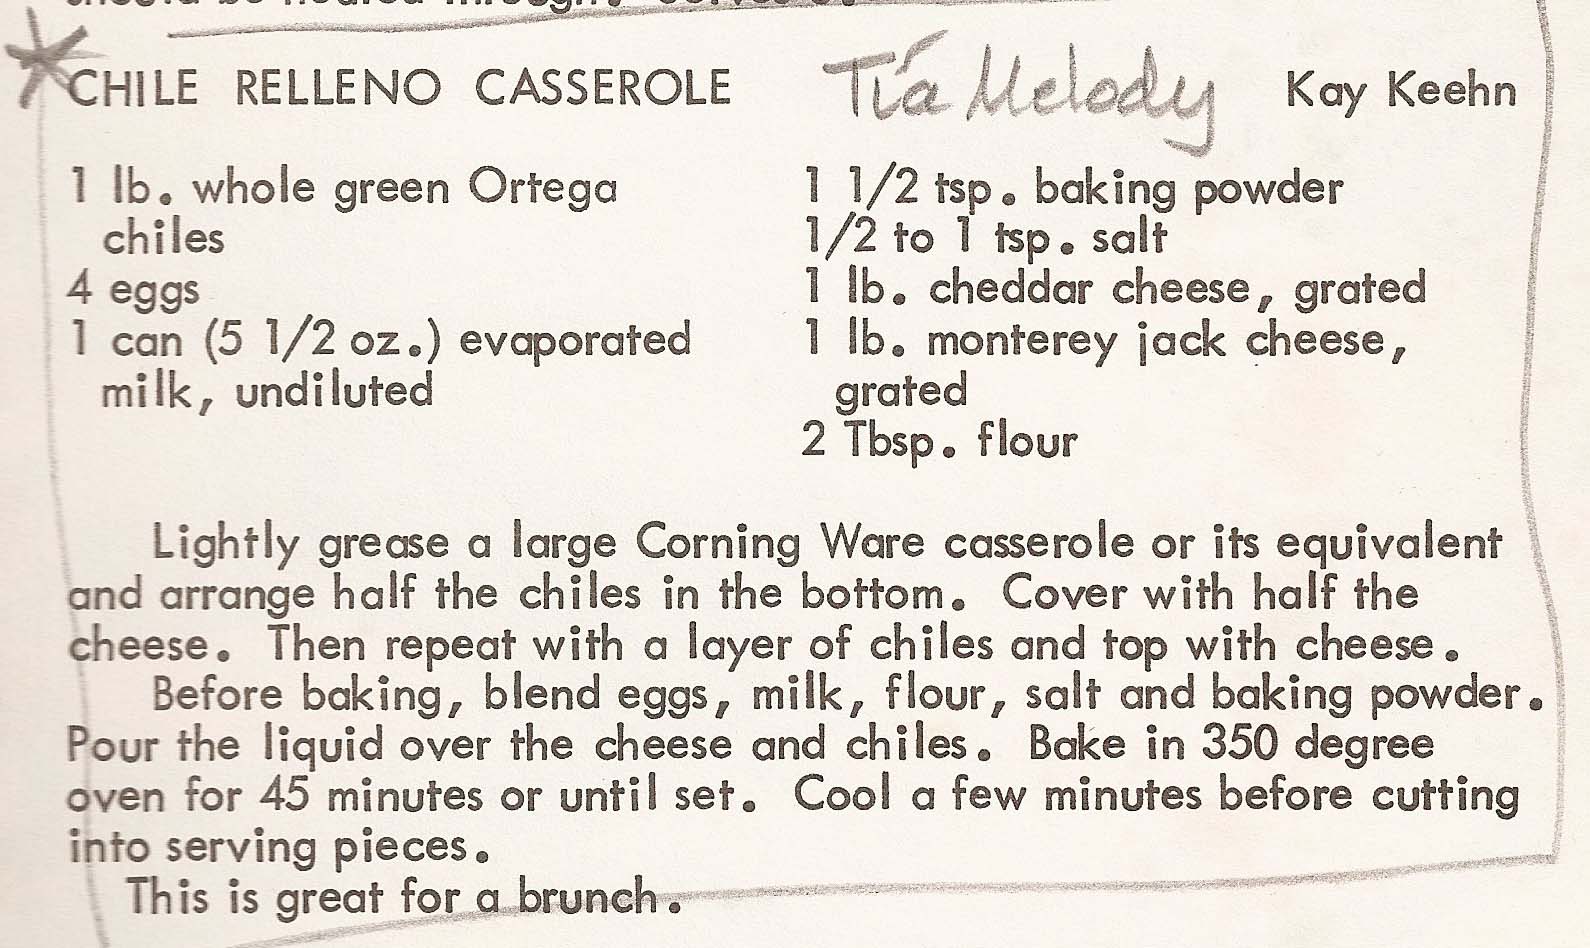 What is an easy recipe for chile relleno?